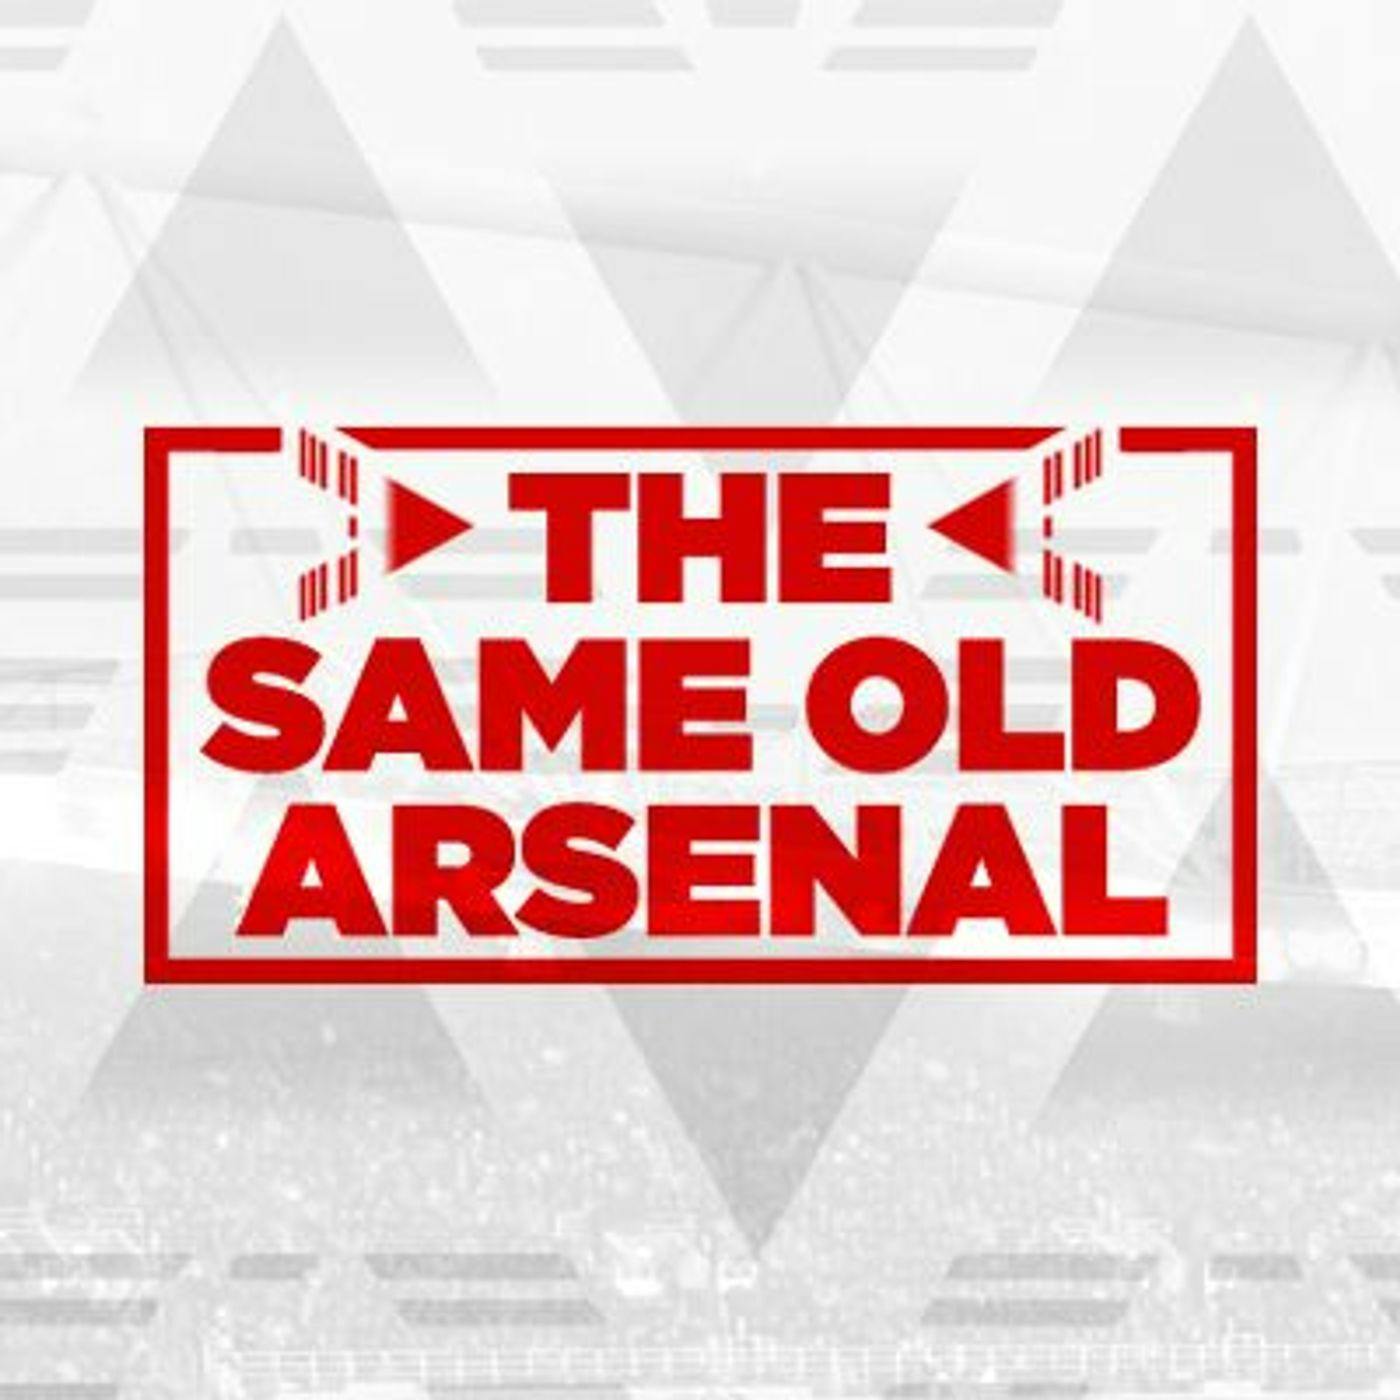 Arsenal 0-3 Liverpool | All Too Easy | The Same Old Arsenal